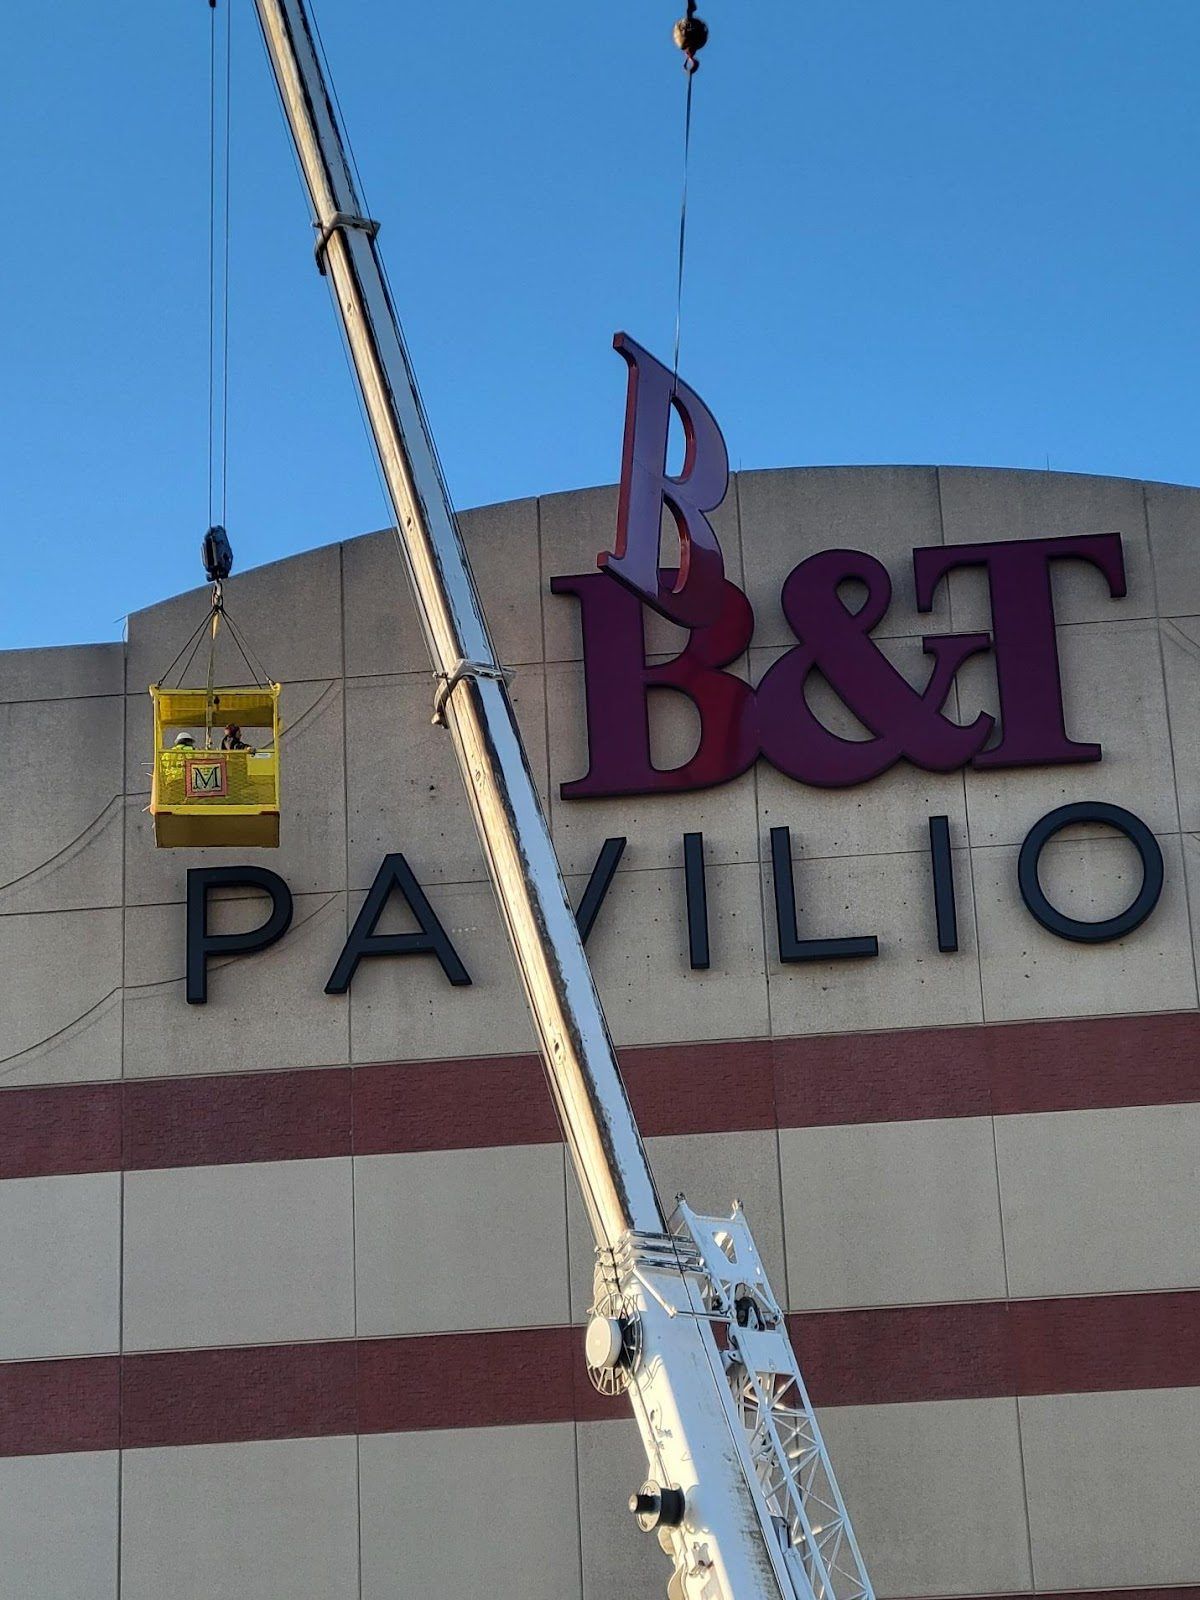 End of an Era, Martino Signs Removes the BB&T Letters in Camden, NJ for New Sponsor.